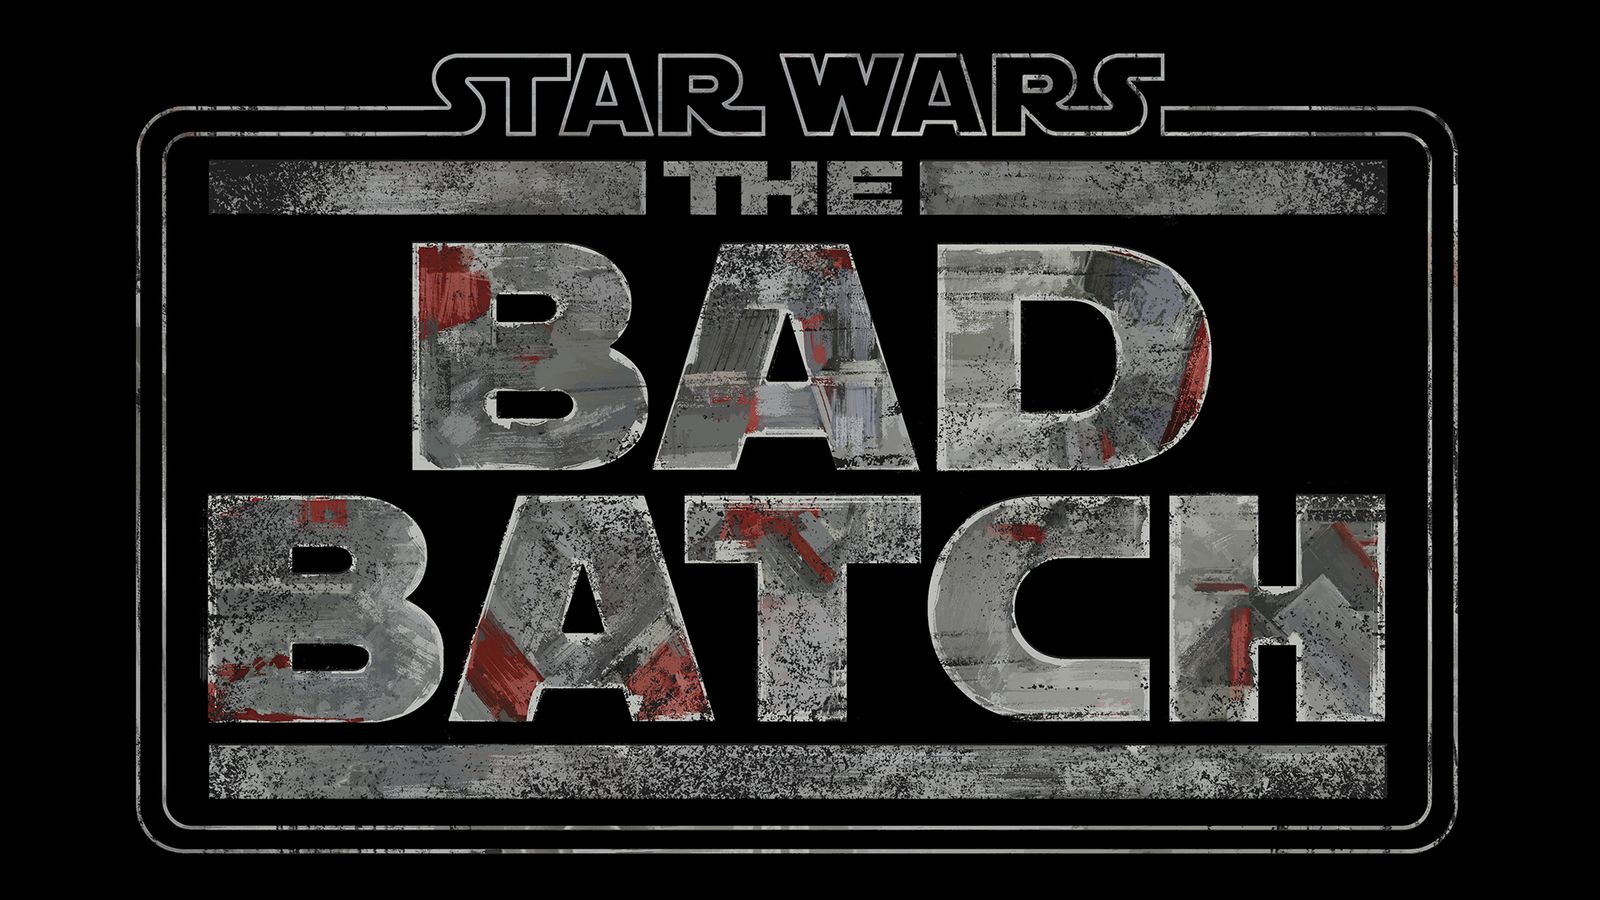 New Star Wars series 'The Bad Batch' to debut on Disney+